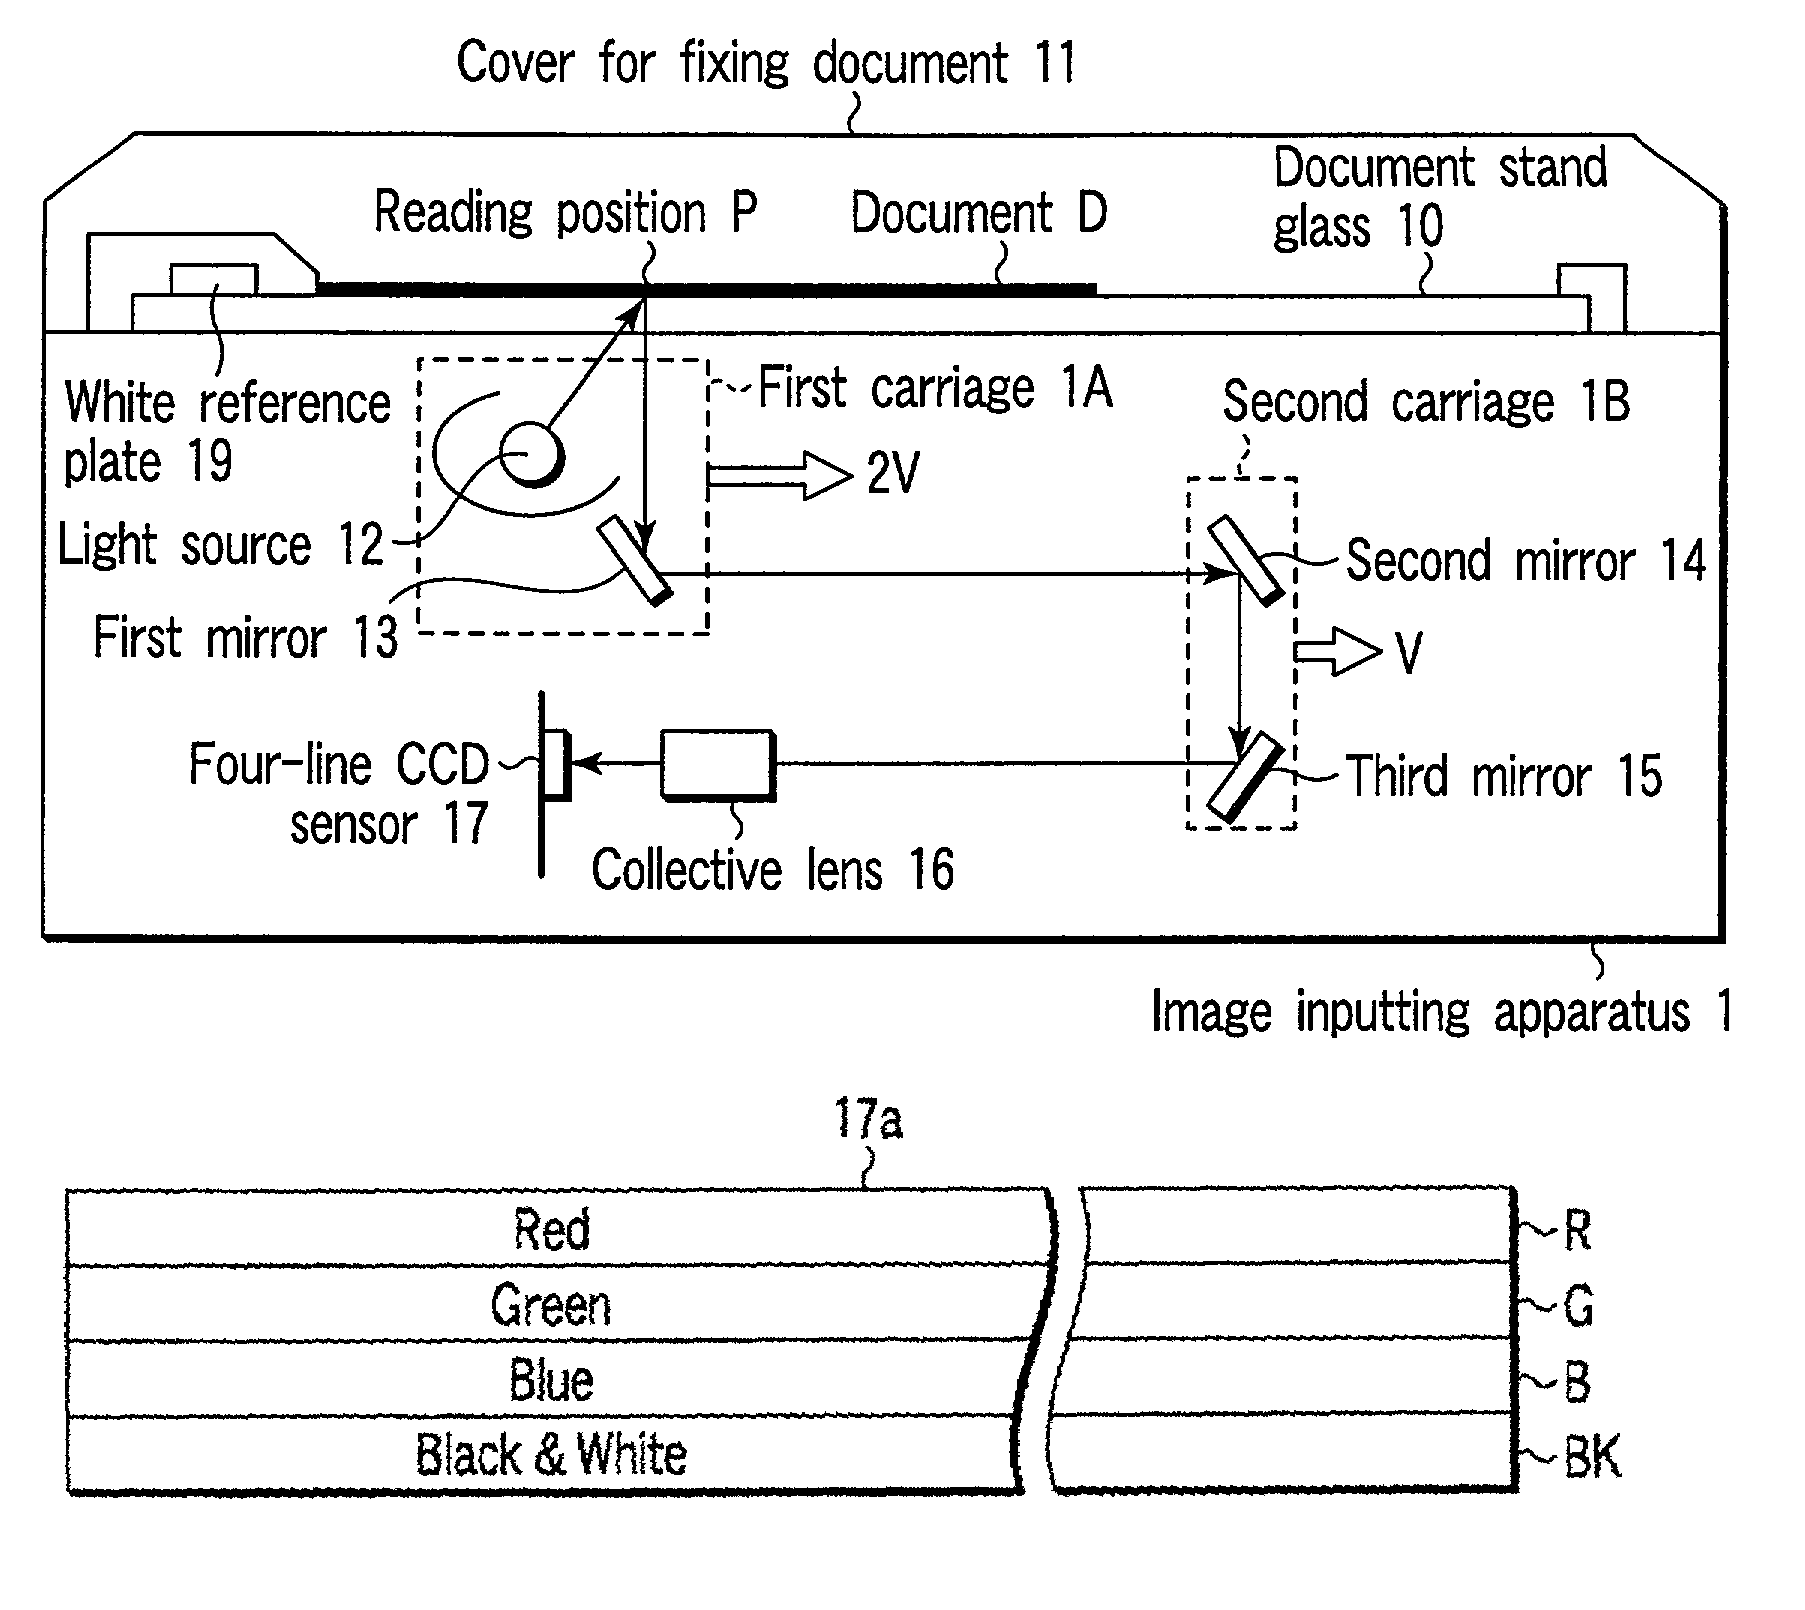 Image inputting apparatus and image forming apparatus using four-line CCD sensor